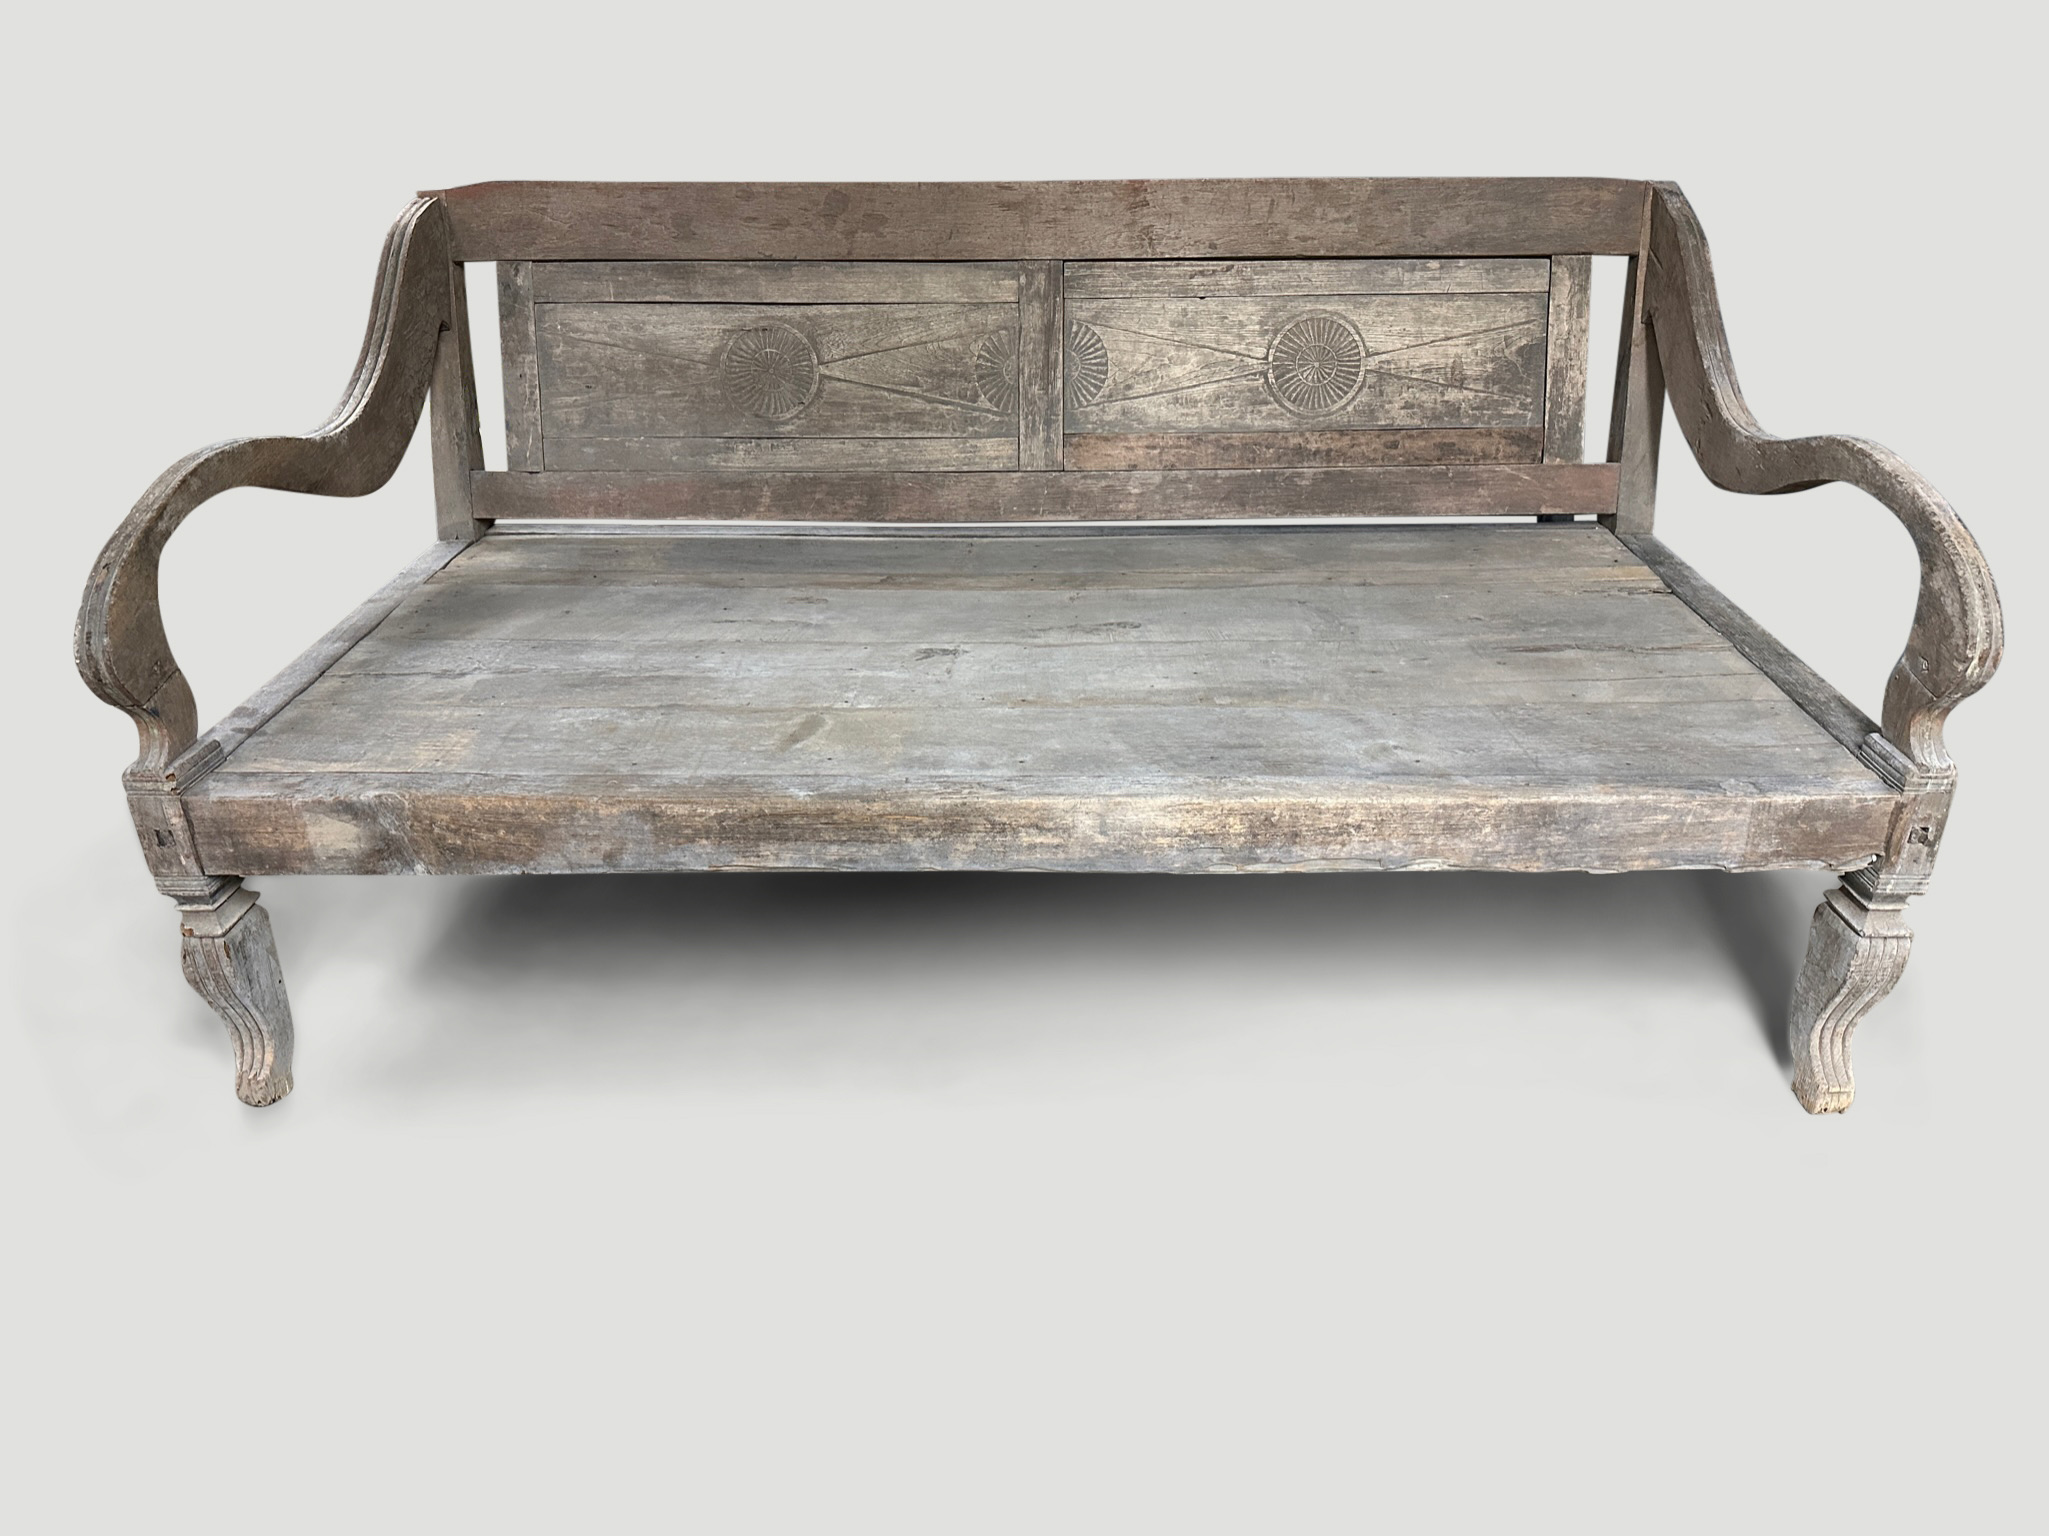 antique teak day bed from the island of Madura